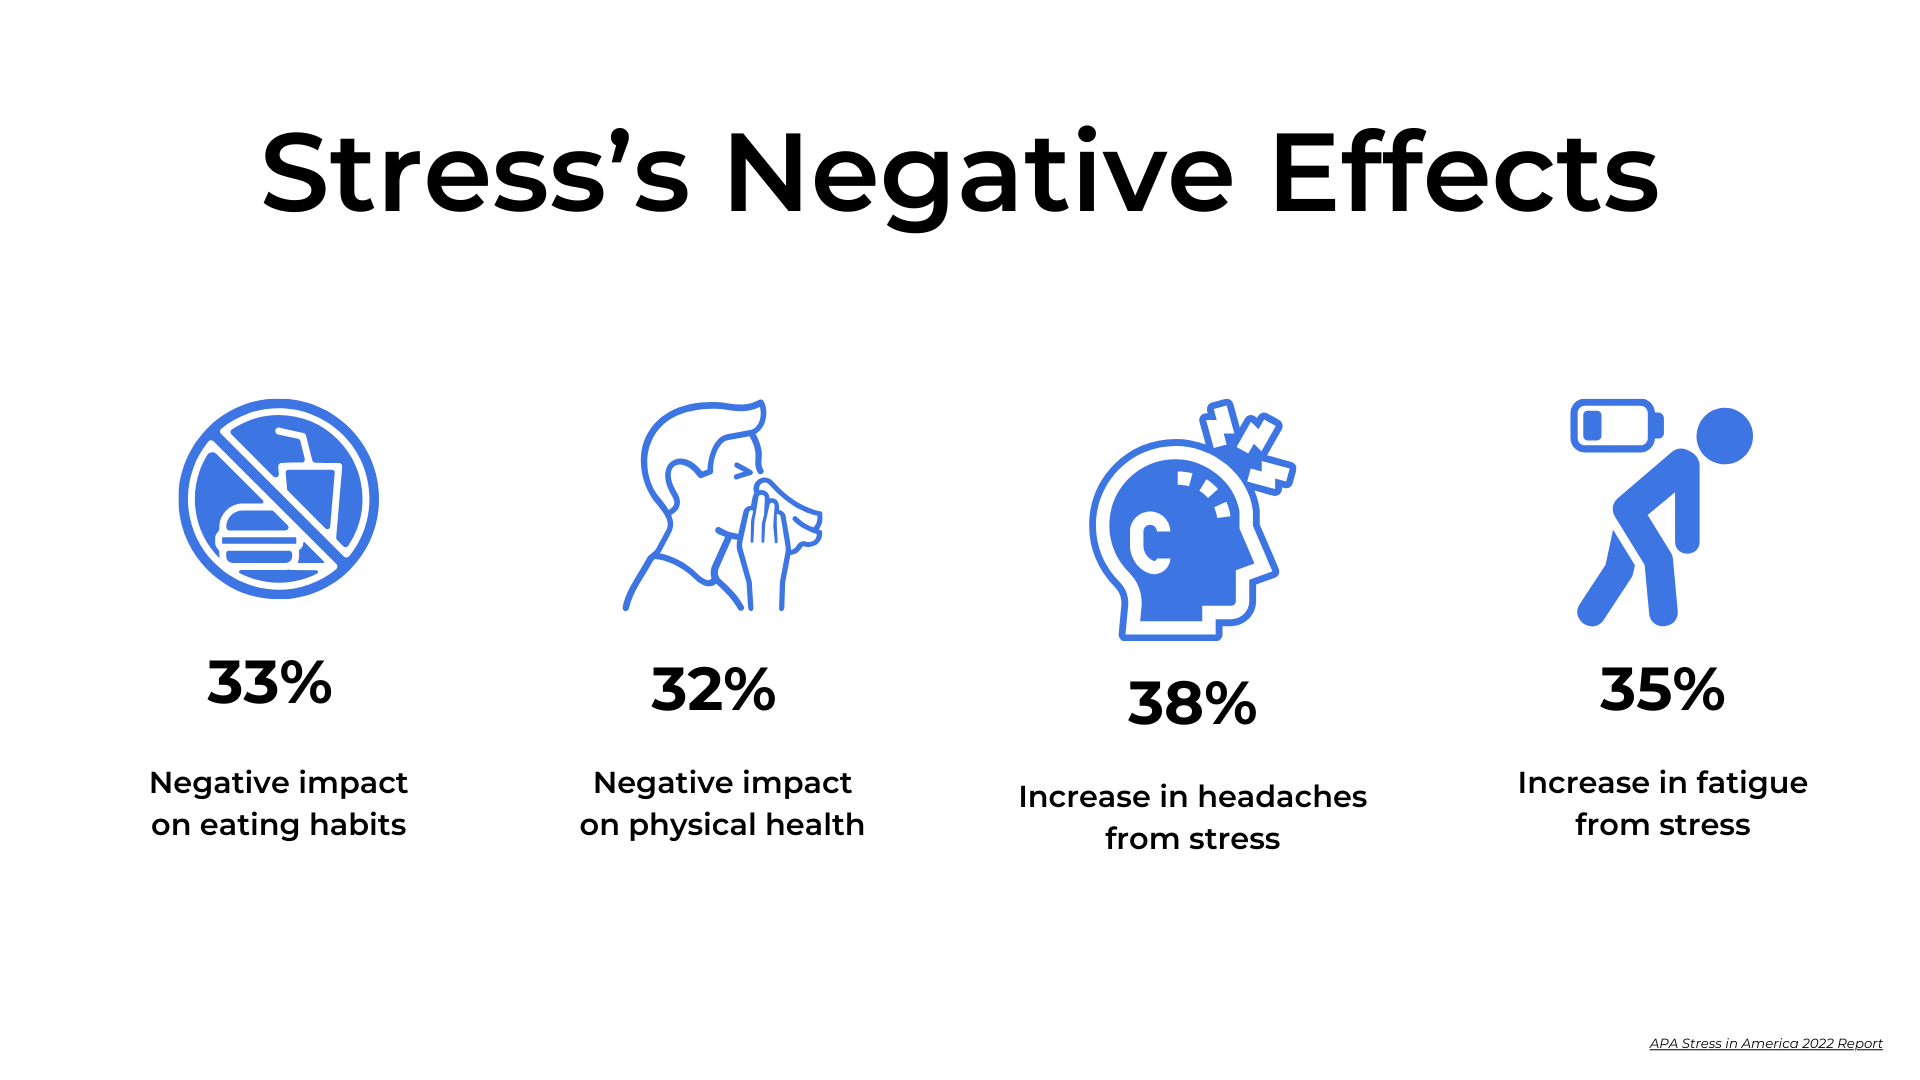 Stress's Negative Physical Effects: 33% negative impact on eating habits; 32% negative impact on physical health; 38% increase in headaches from stress; 35% increase in fatigue from stress.